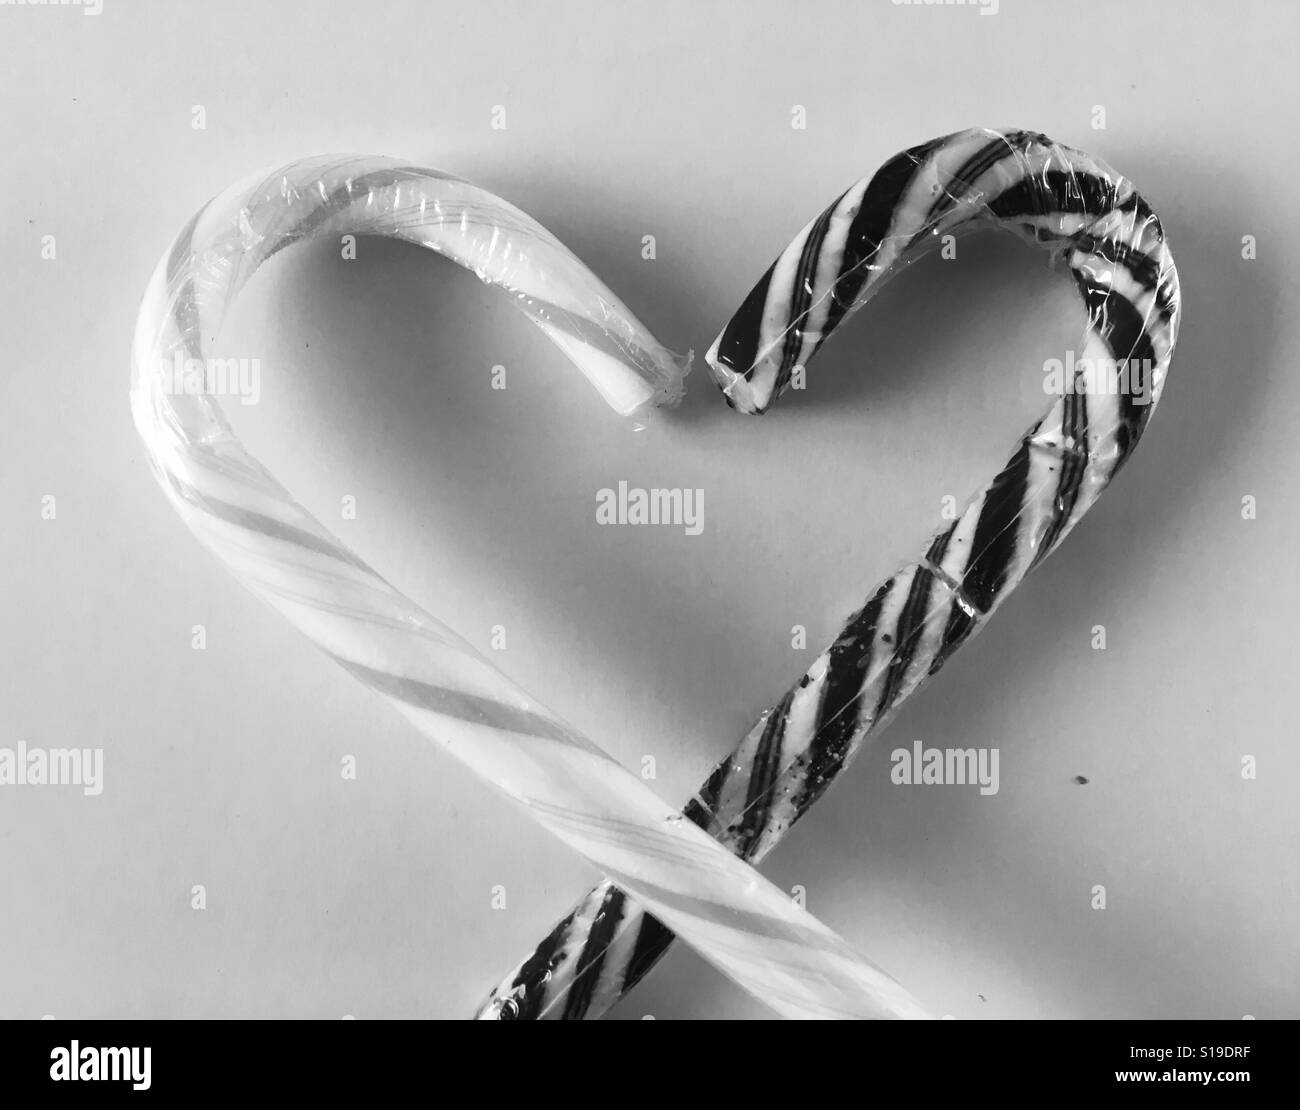 Candy canes Black and White Stock Photos & Images - Alamy